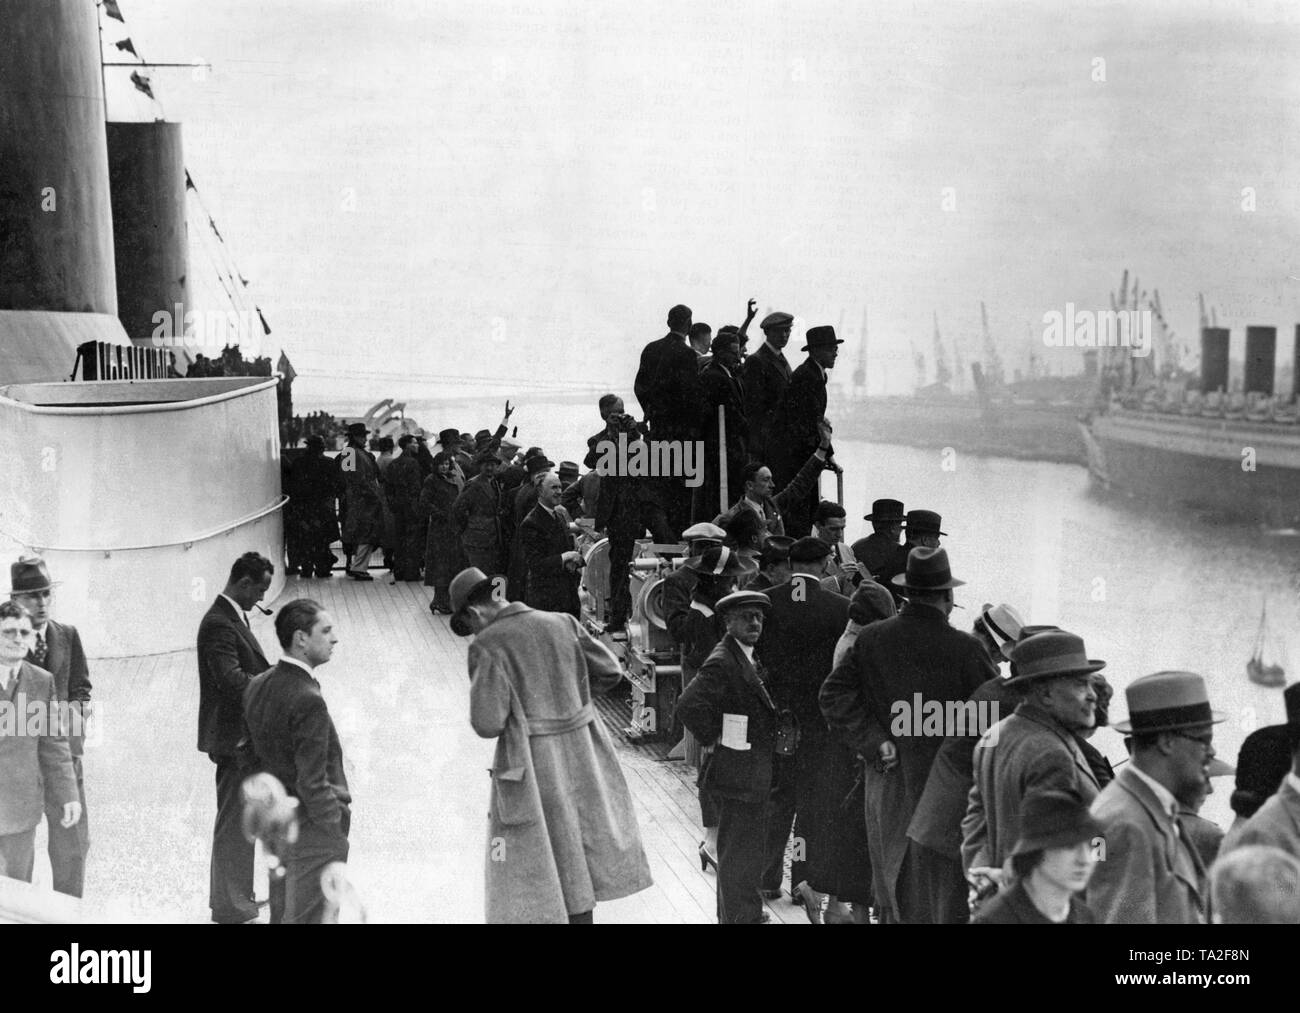 Passengers of the 'Normandie' waving at the 'Ile de France' at an encounter of the two big French ocean liners. Stock Photo